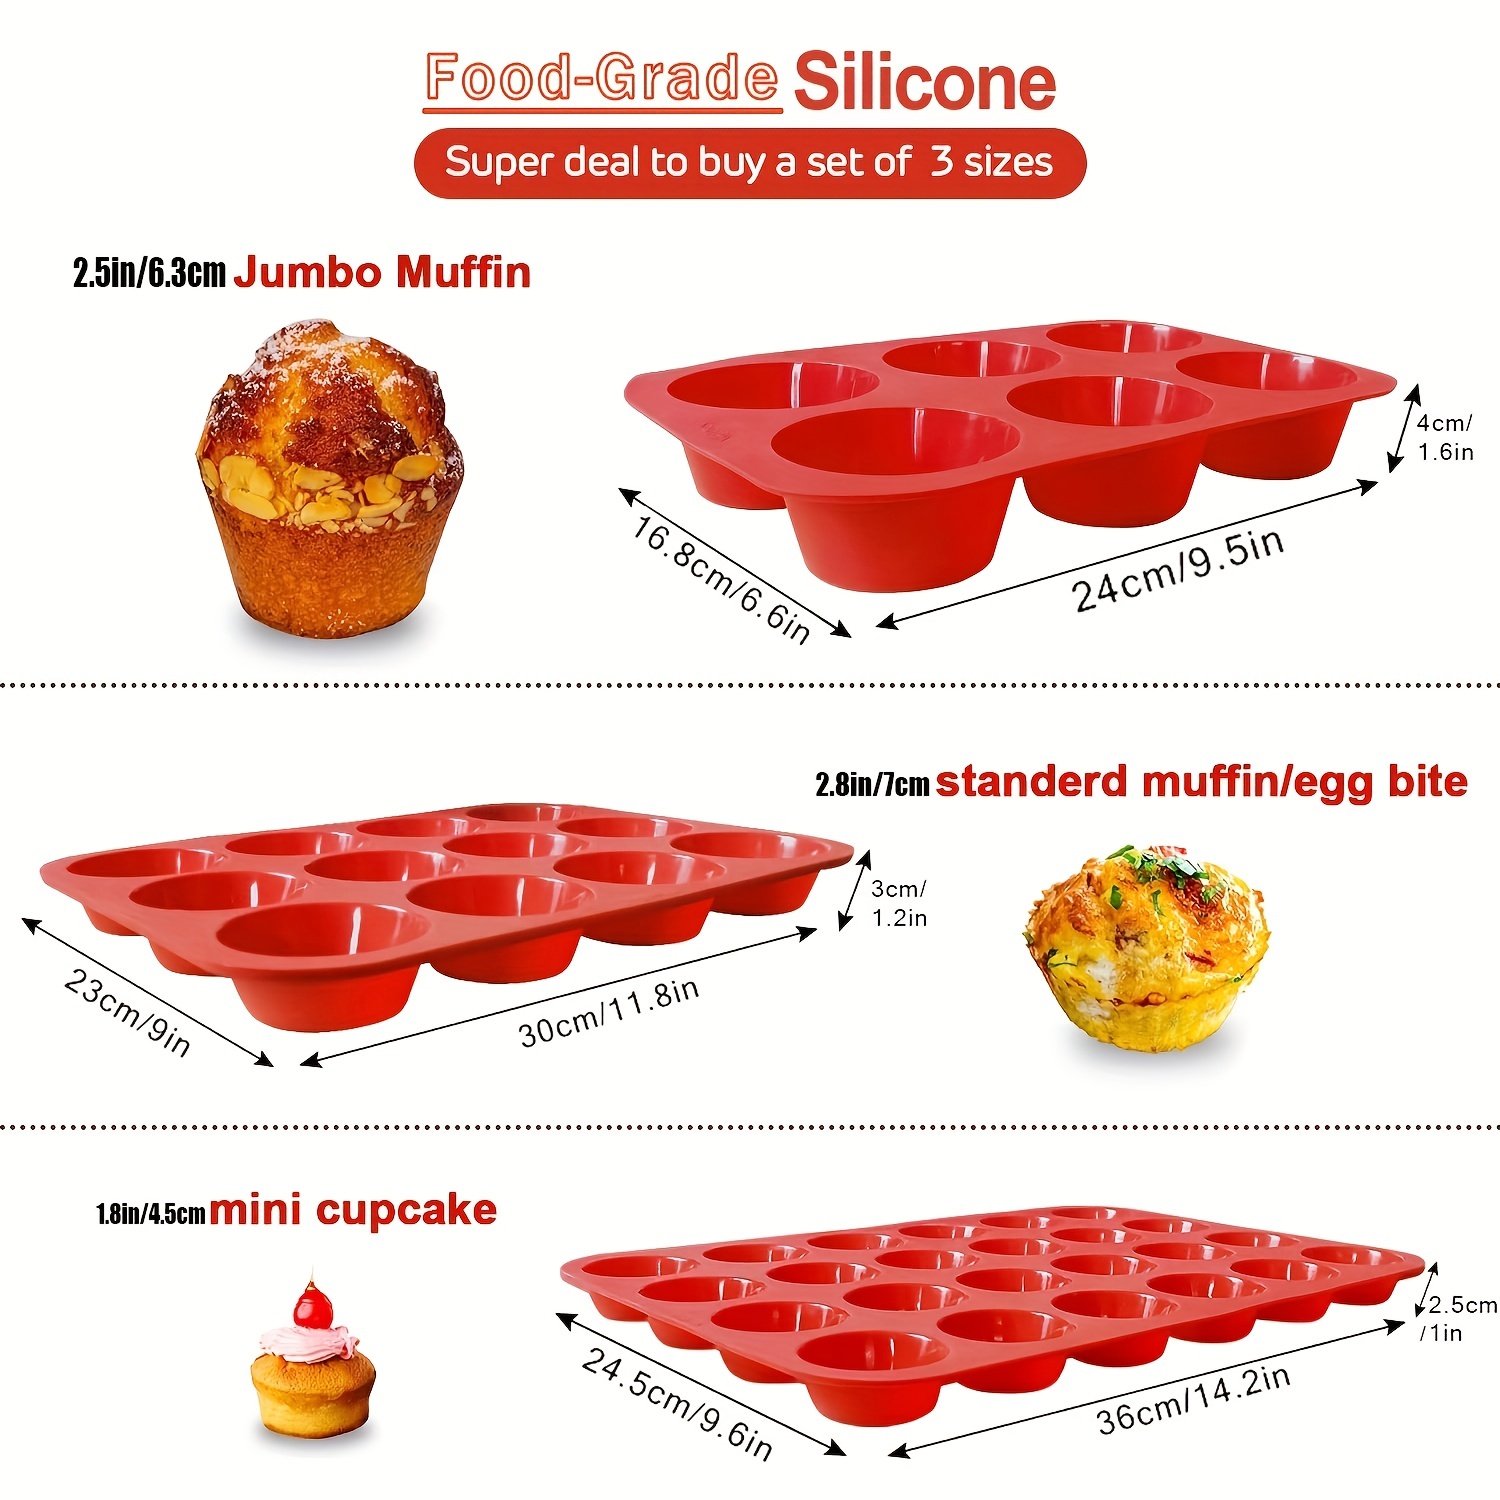 Silicone Muffin Pan - 6 Cup Non-Stick Silicone Cupcake Pan, Just PoP Out!  Food Grade and BPA Free Baking Cups, Perfect for Egg Muffin, Cupcake,  Dishwasher Safe (2 Pack Muffin Pan) 